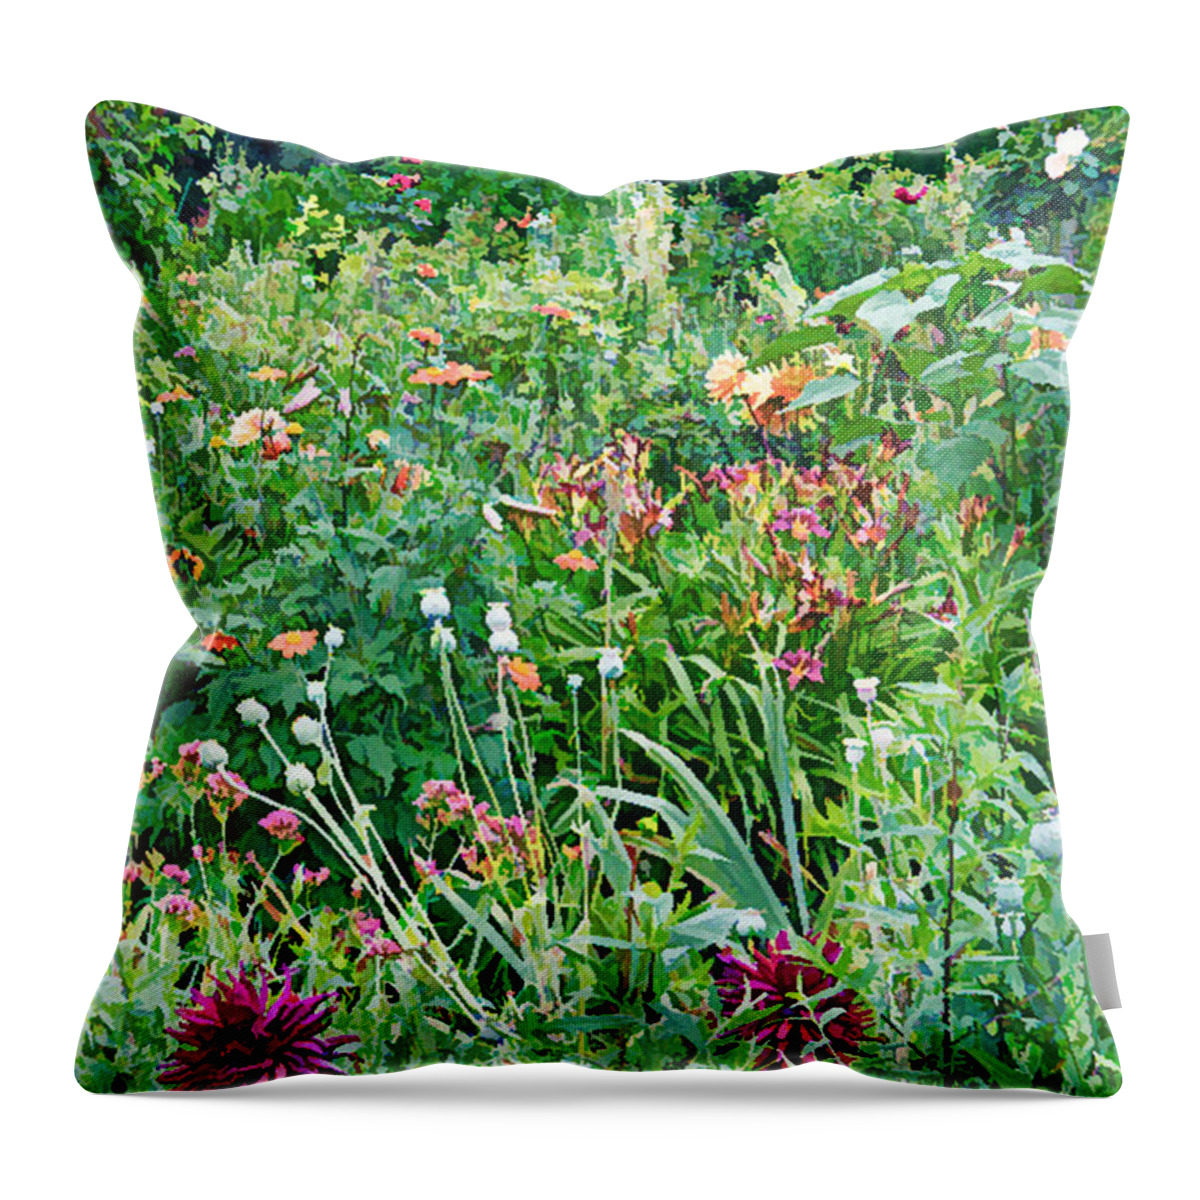 Giverny Throw Pillow featuring the photograph Garden At Giverny II by Joe Roache